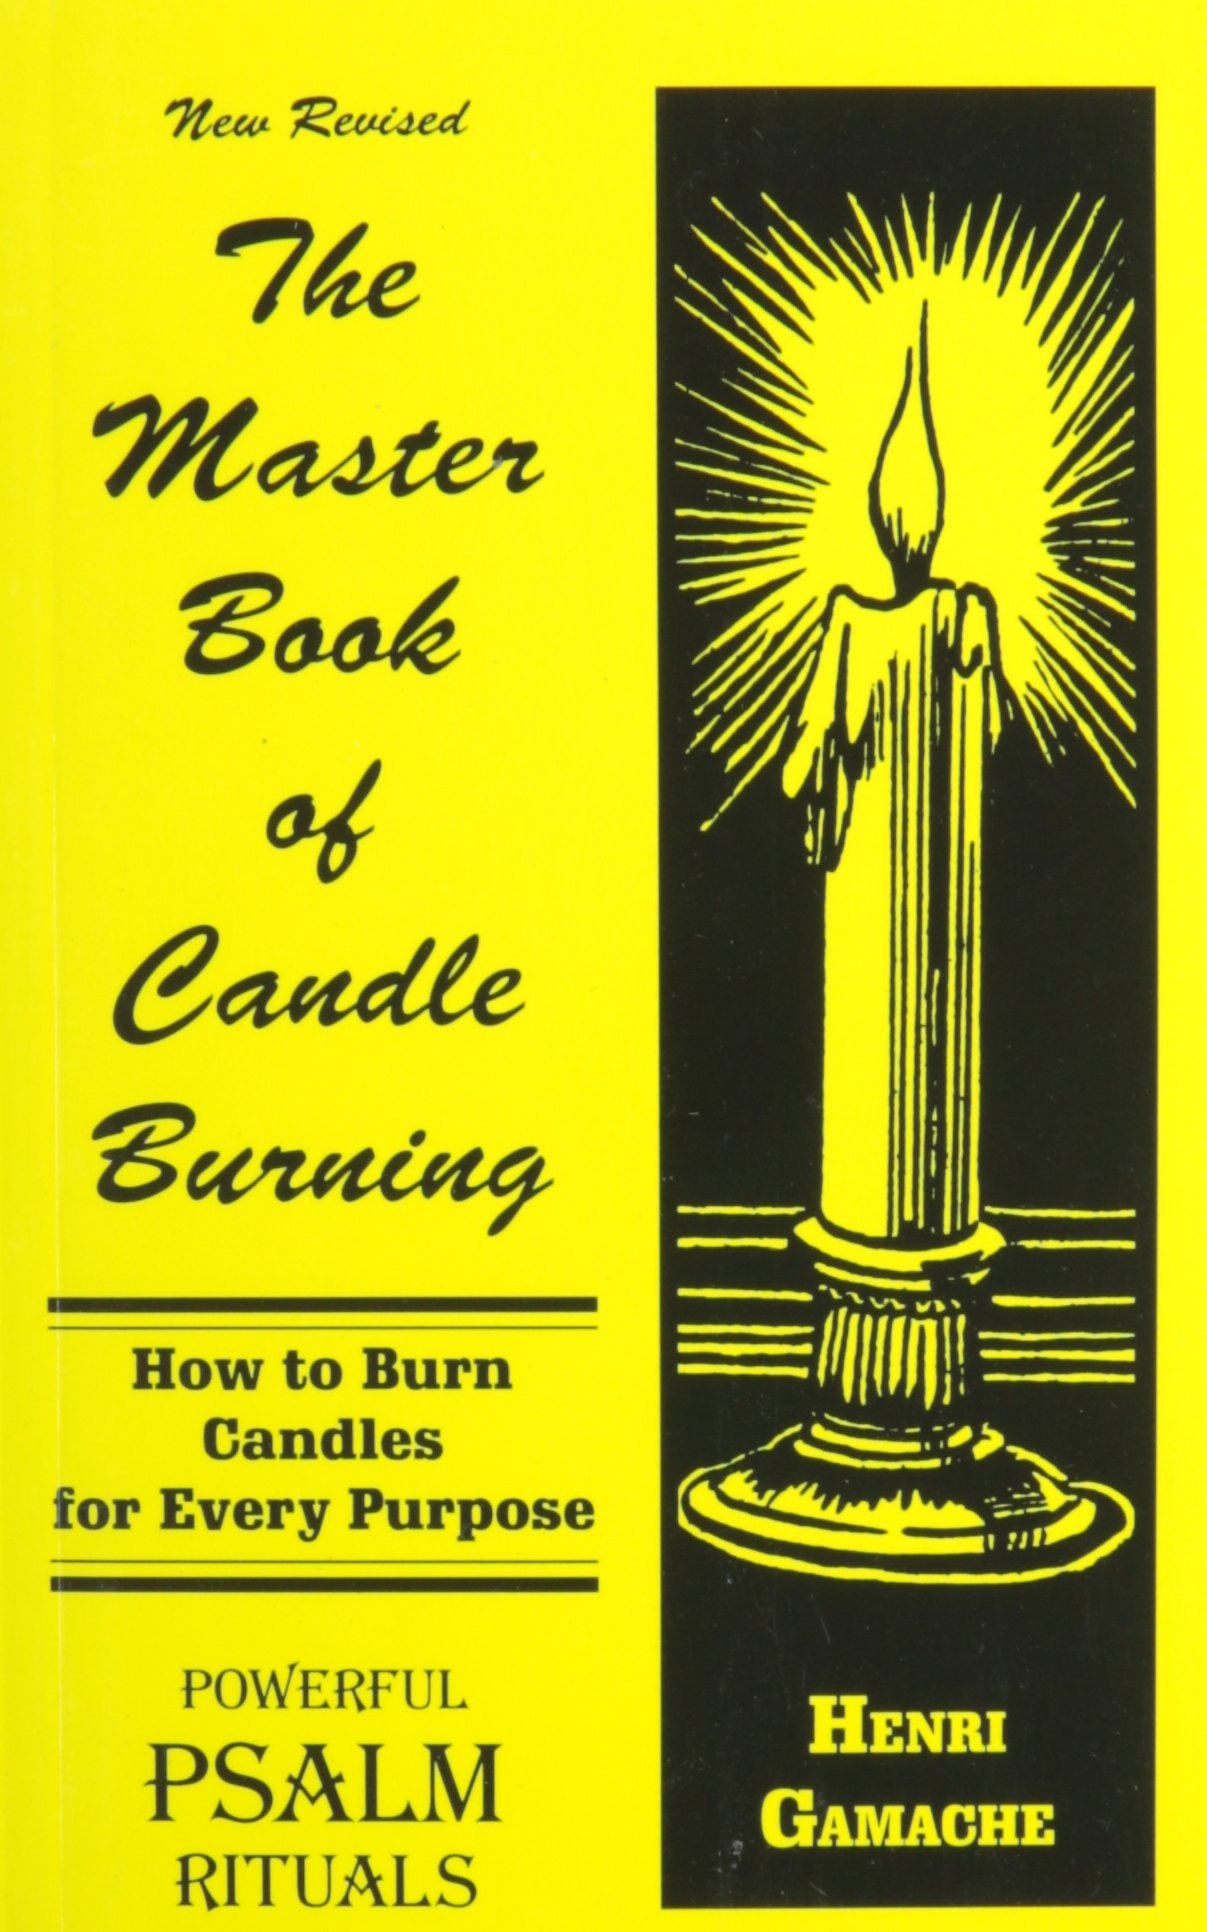 The Master Book of Candle Burning, or How to Burn Candles for Every Purpose